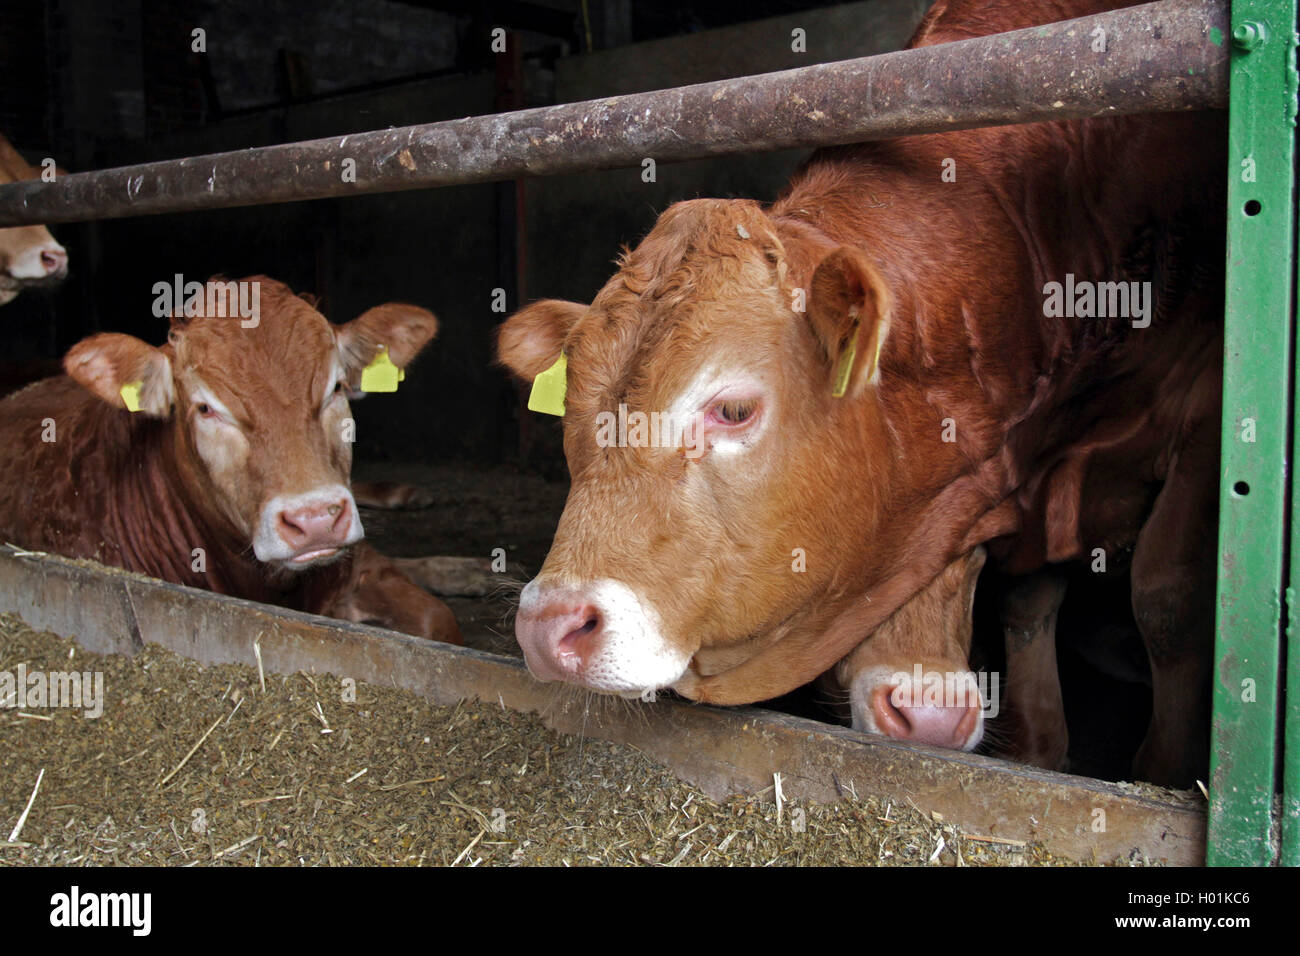 Limousin cattle, domestic cattle (Bos primigenius f. taurus), Limousin cattles in the stable, Germany Stock Photo